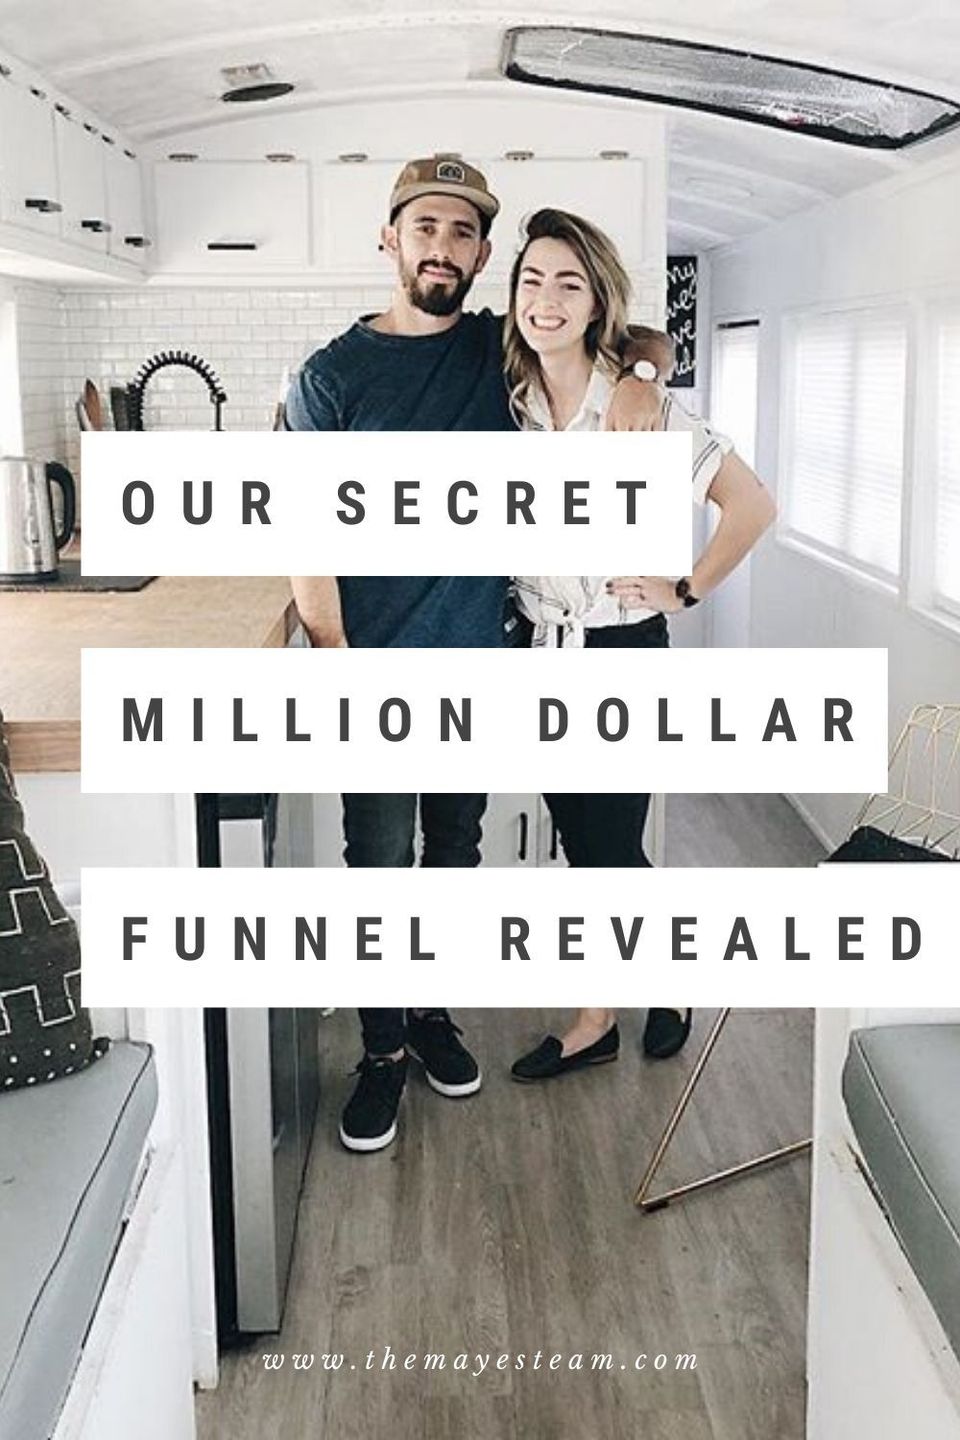 Gabriel Mayes wraps his arm over Debbie Mayes shoulder as they stand in the kitchen of their Skoolie bus. Text overlays the image that read, “Our Secret Million Dollar Click Funnel Revealed”